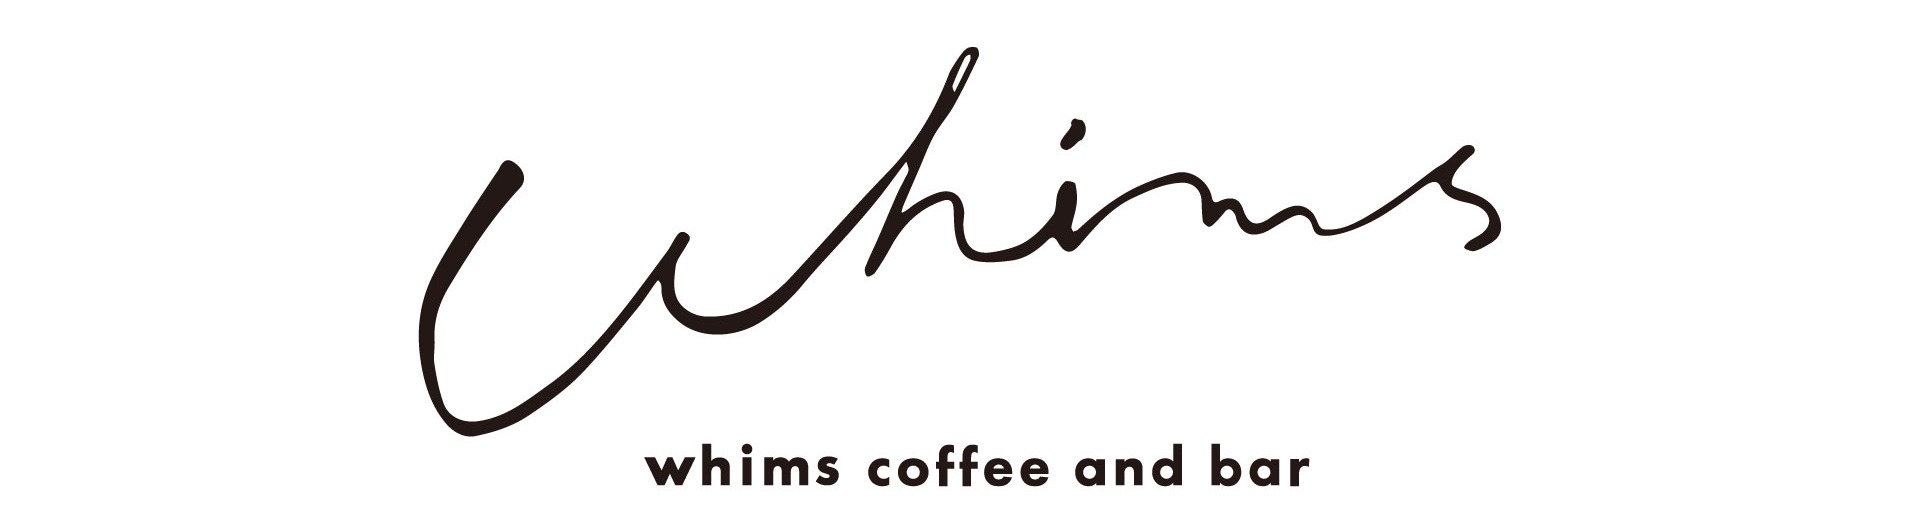 whims coffee and bar